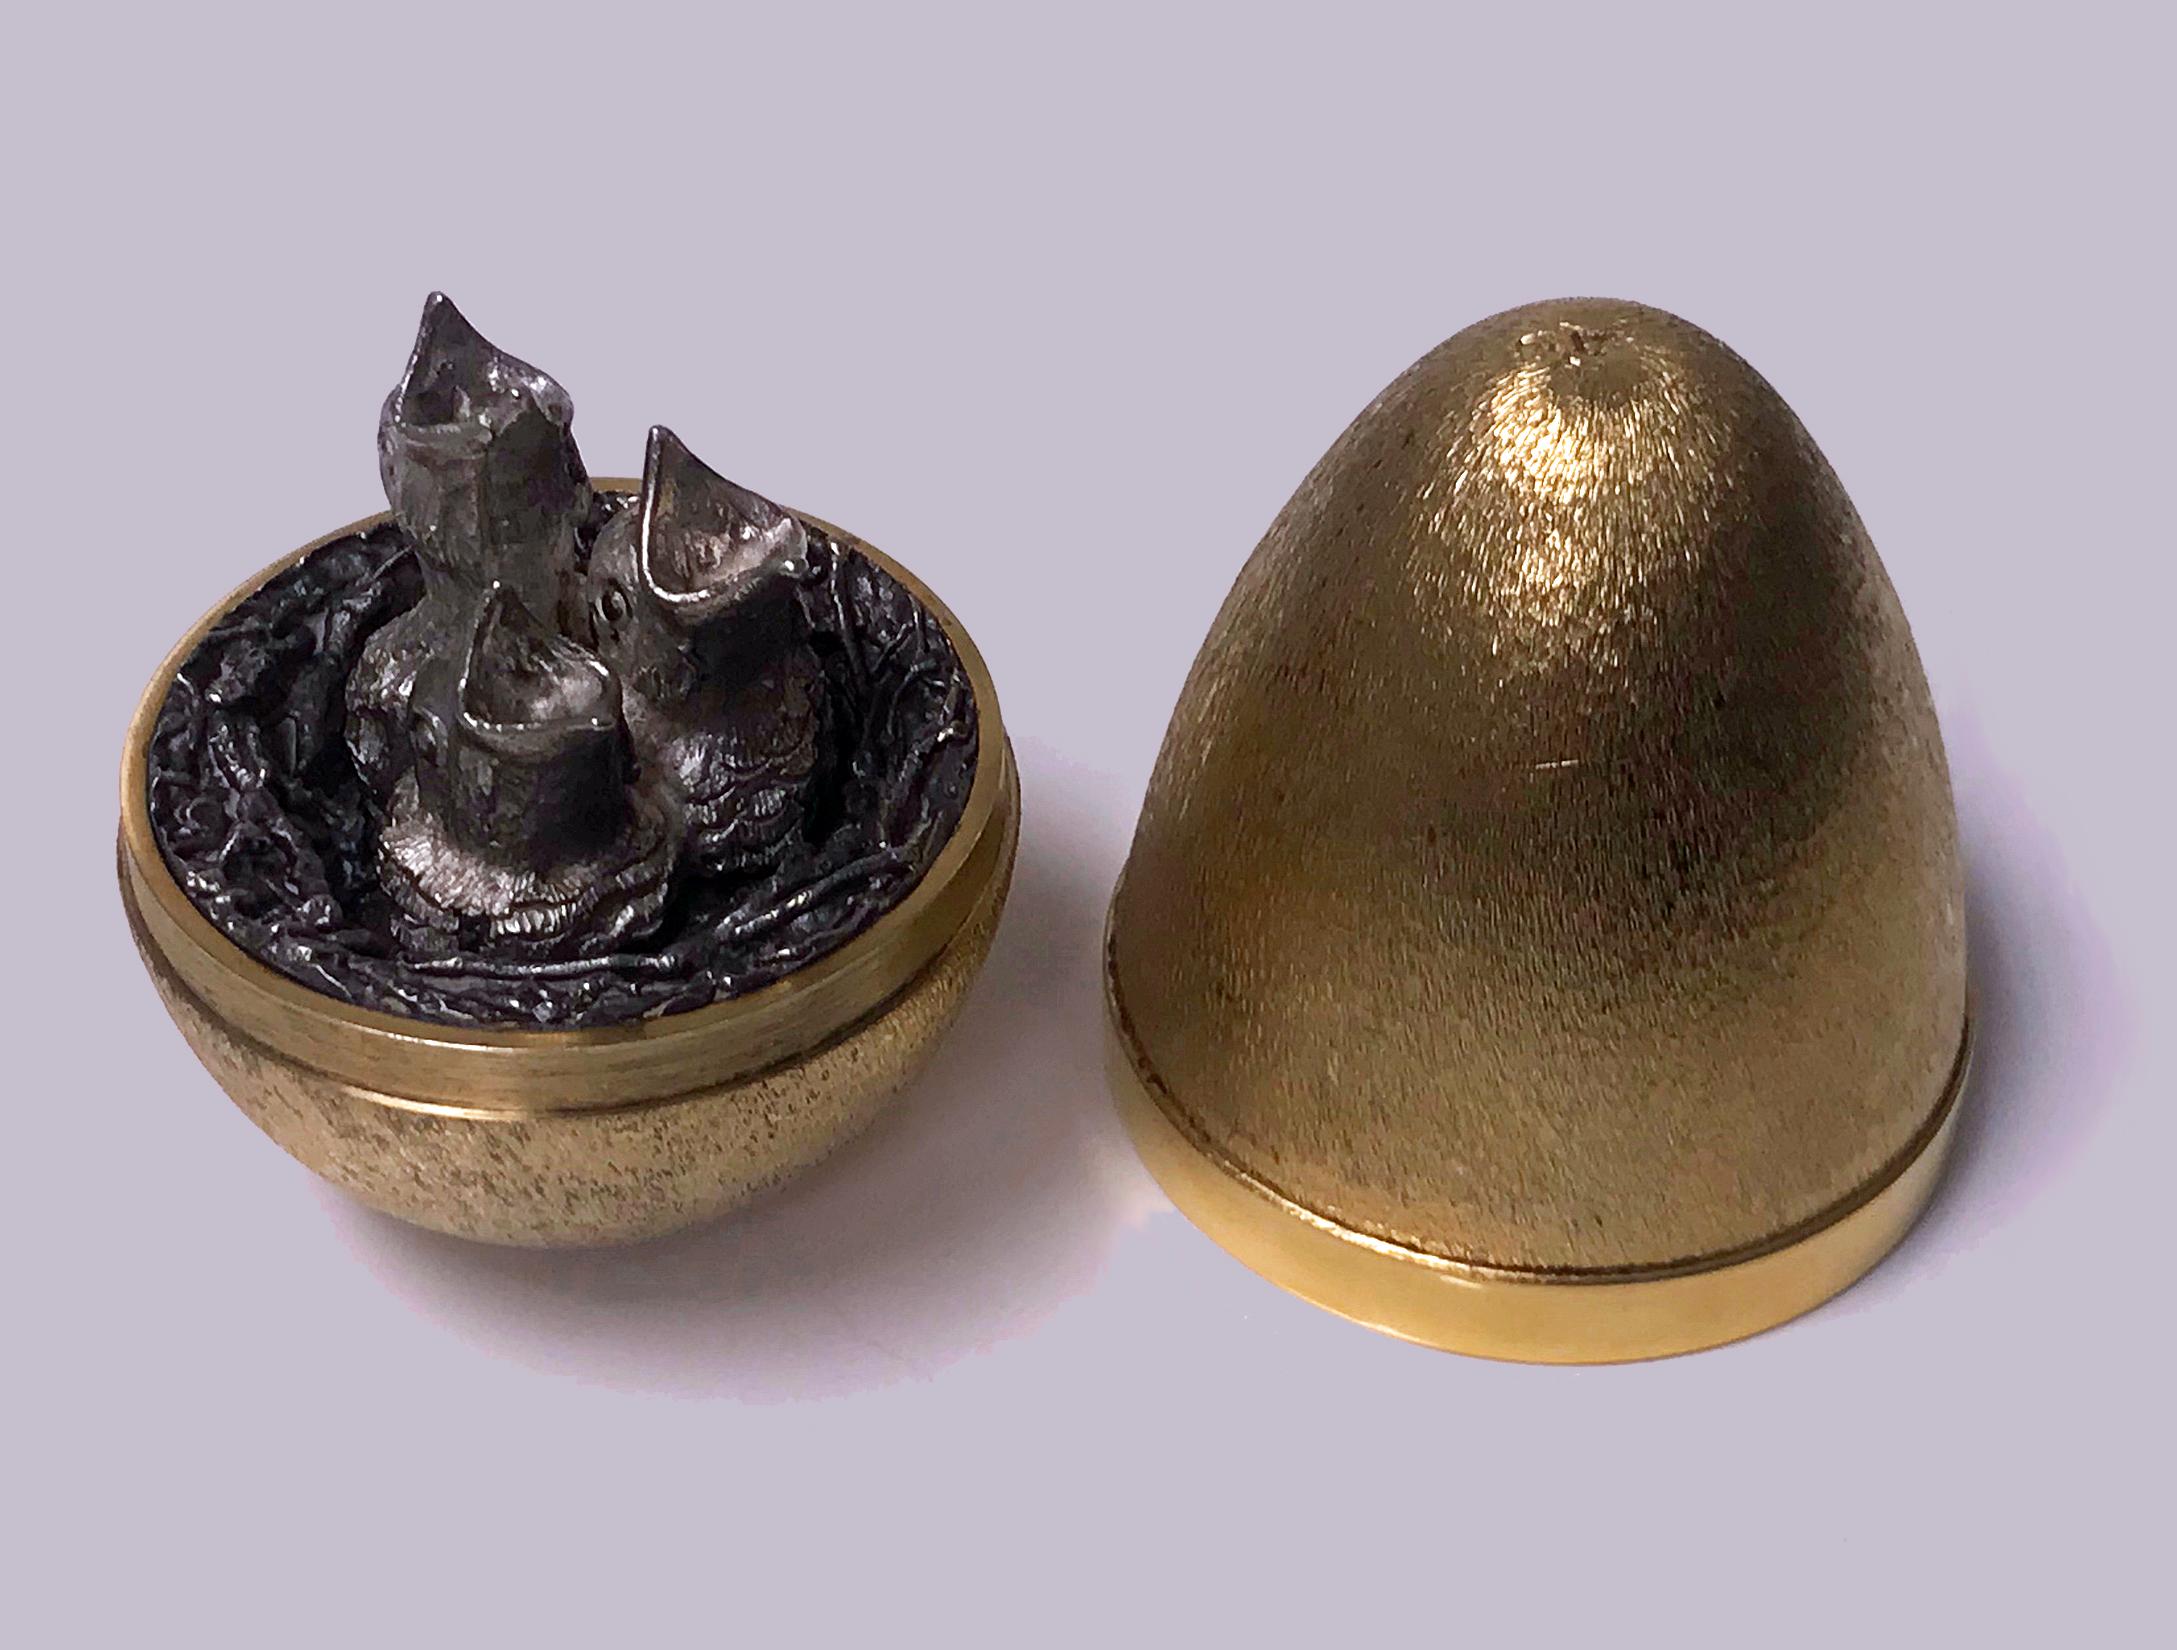 Stuart Devlin Silver Gilt Surprise Egg, London 1973, opening to reveal three hatchlings (chicks) in a nest. Original box and papers. Height: 7.5cm high, No 56 of limited edition of 100. Item Weight: 162 grams